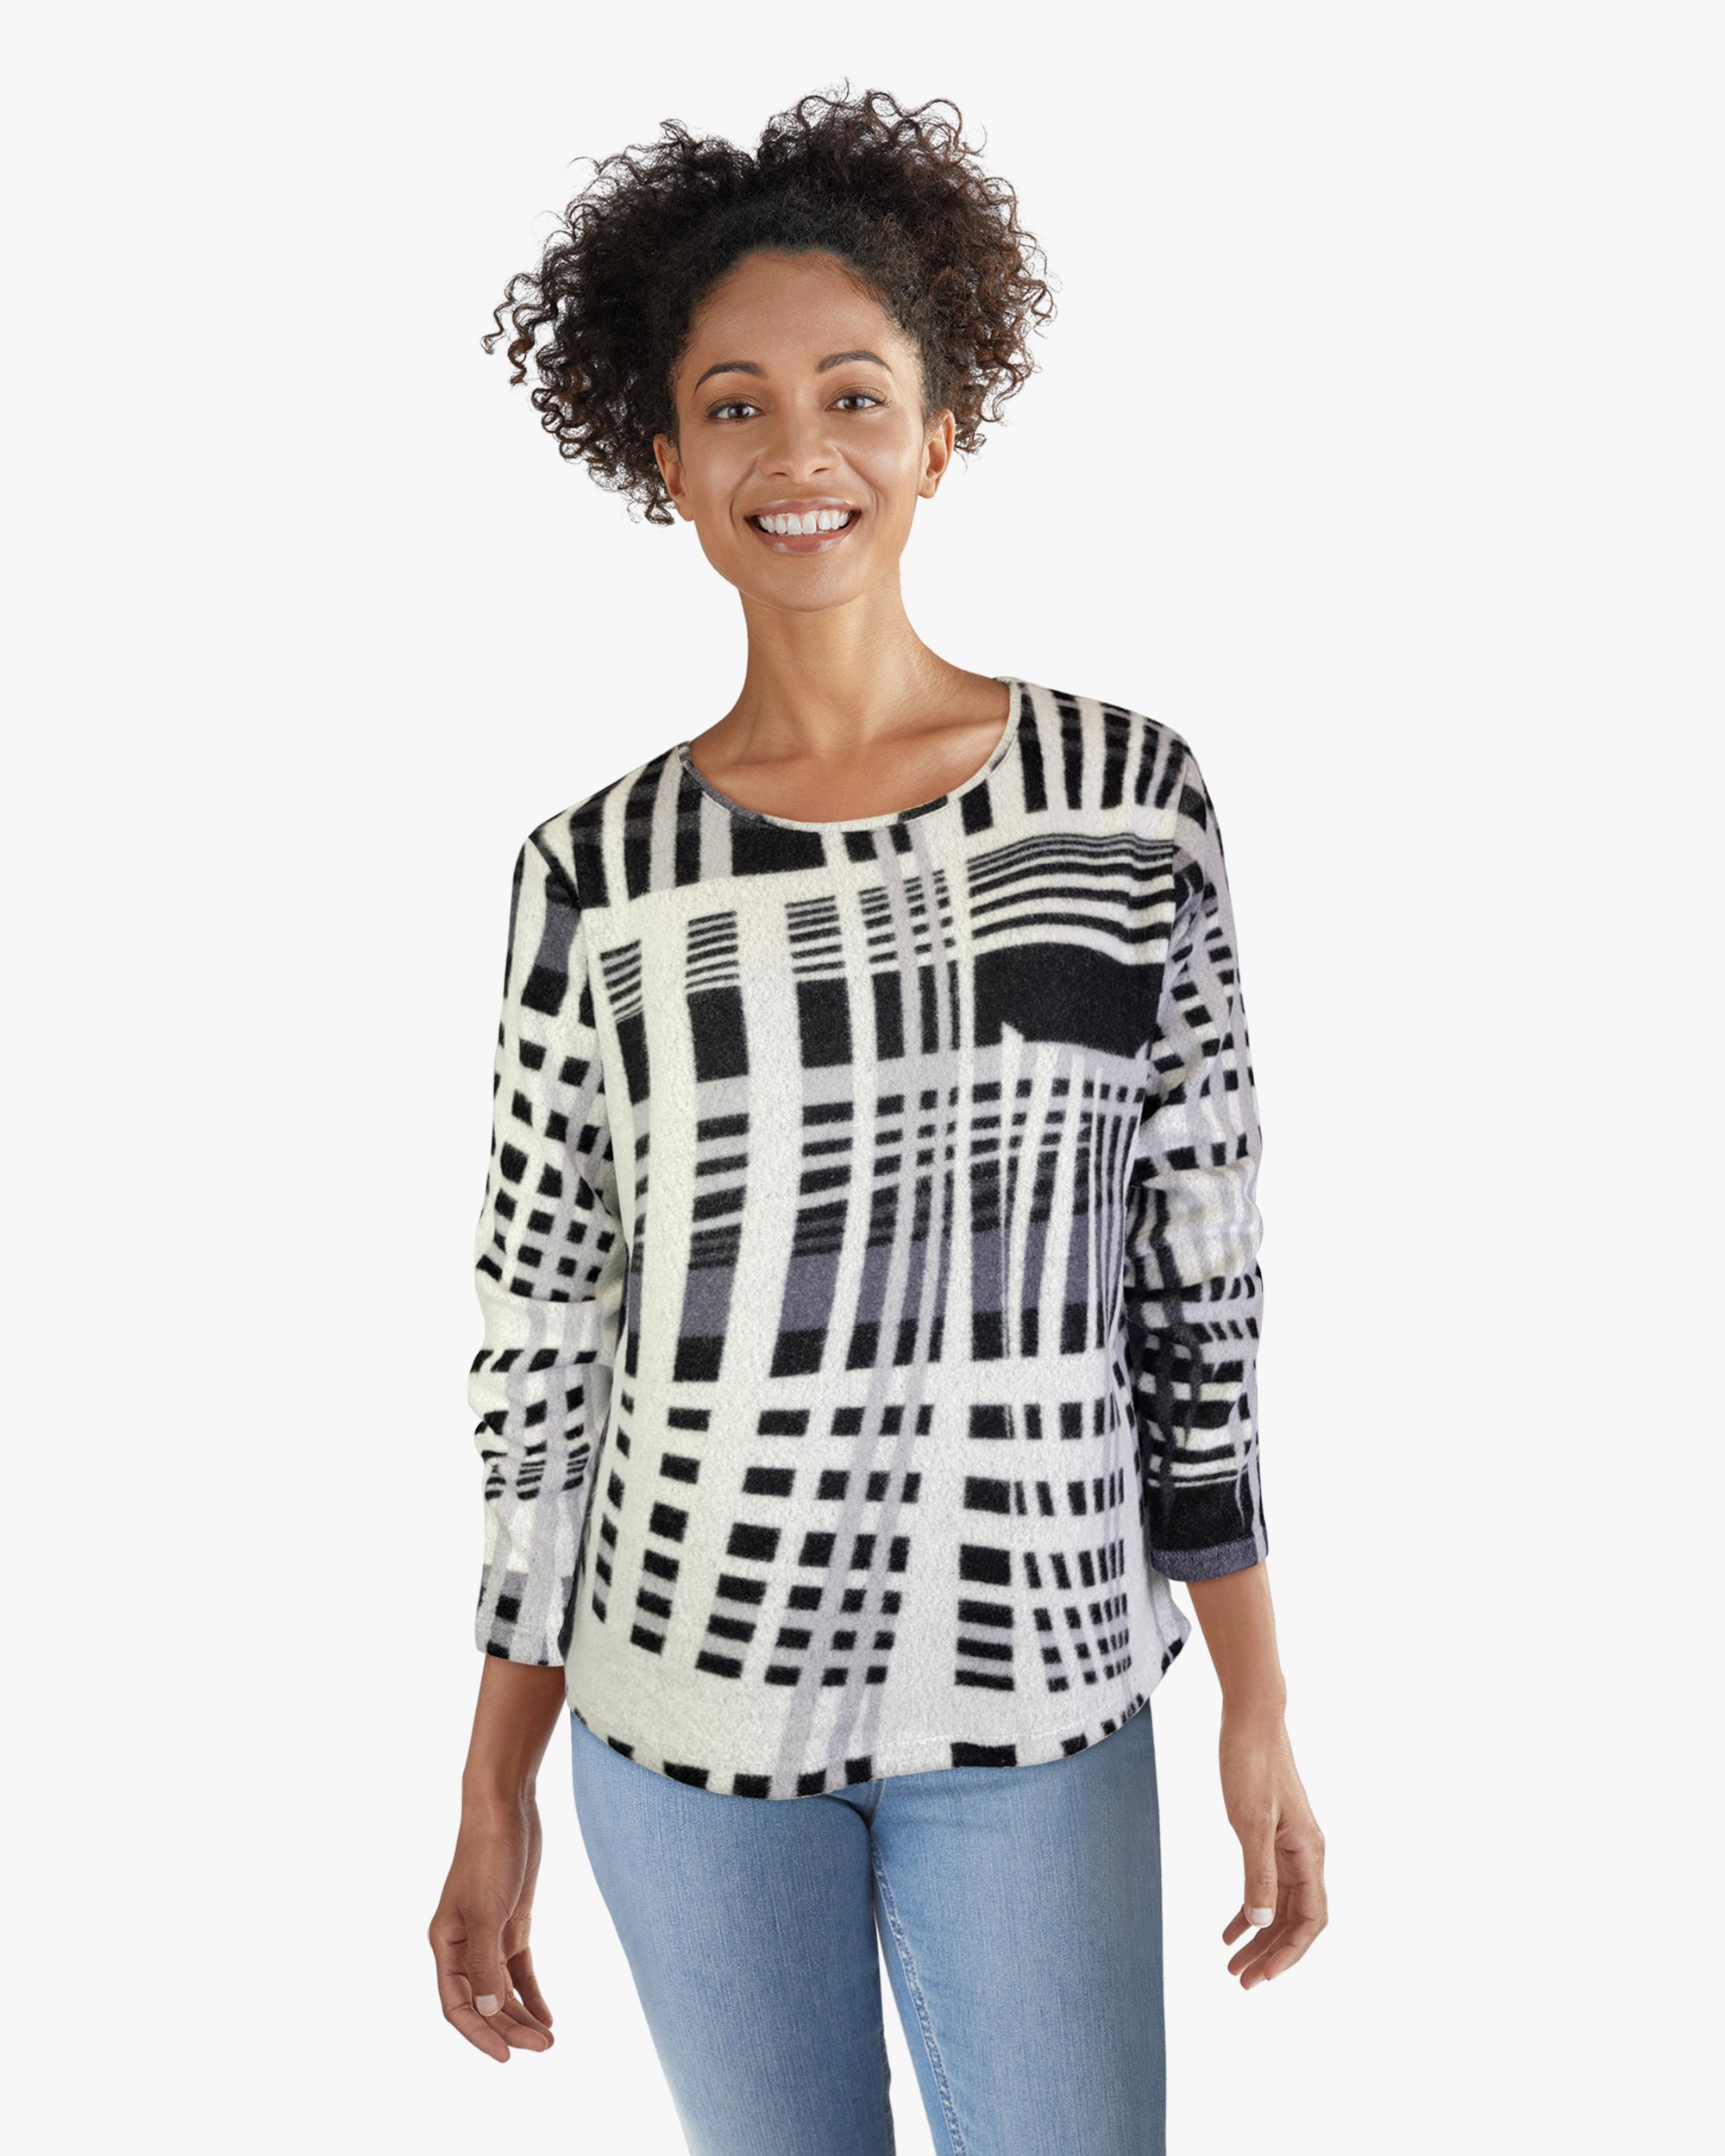 Scoop Neck Sweater-like Top - Black and White (D190638)